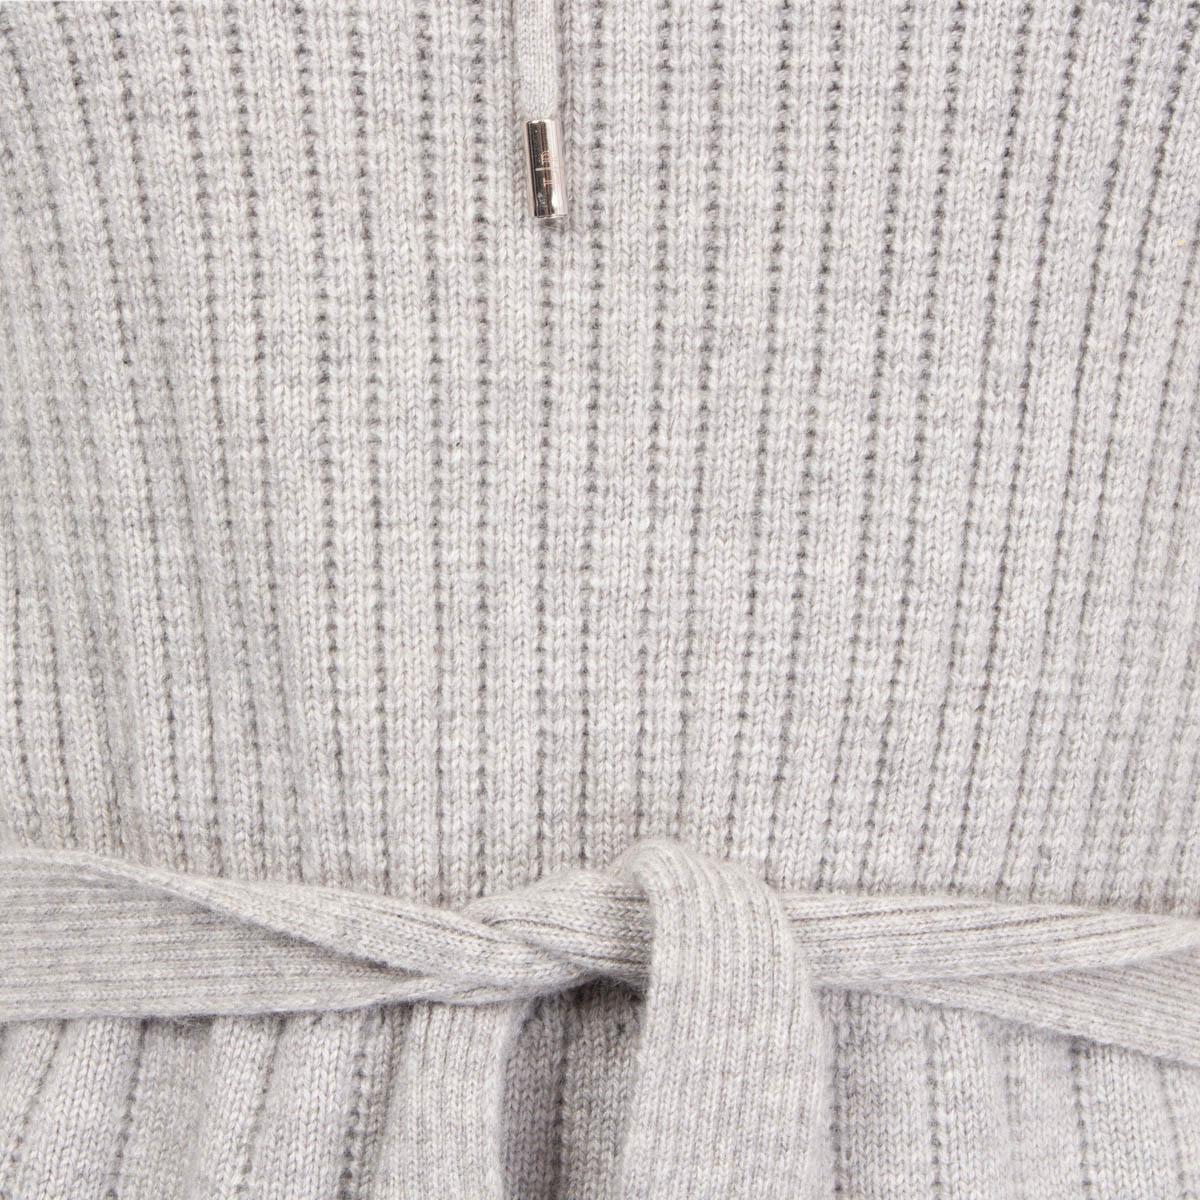 LORO PIANA grey cashmere RIB BELTED TURTLENECK Sweater 36 XXS In Excellent Condition For Sale In Zürich, CH